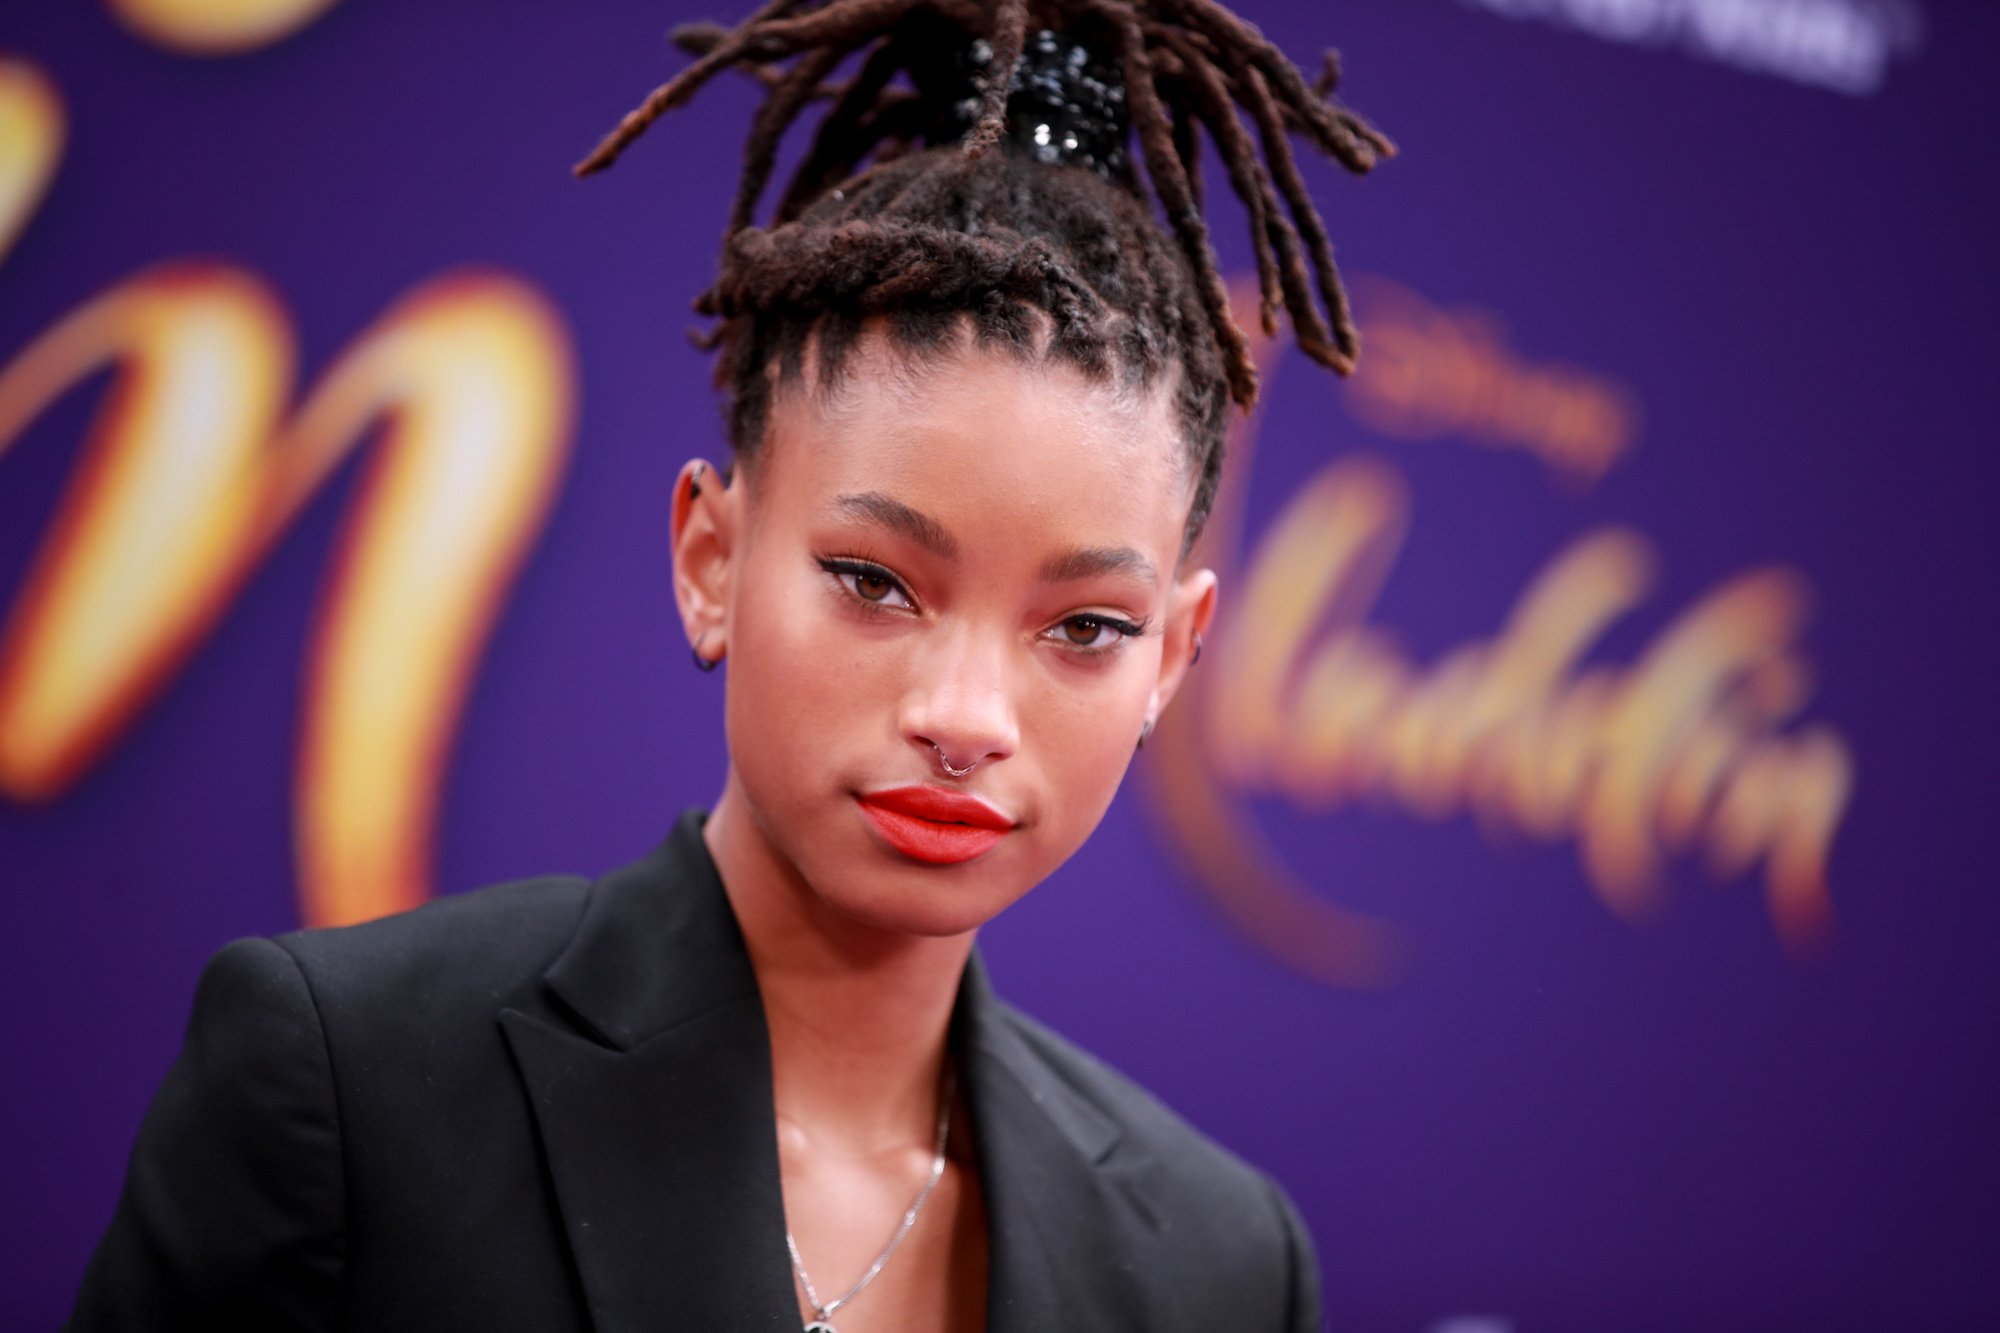 Willow Smith slightly smiling in front of a blurred purple background